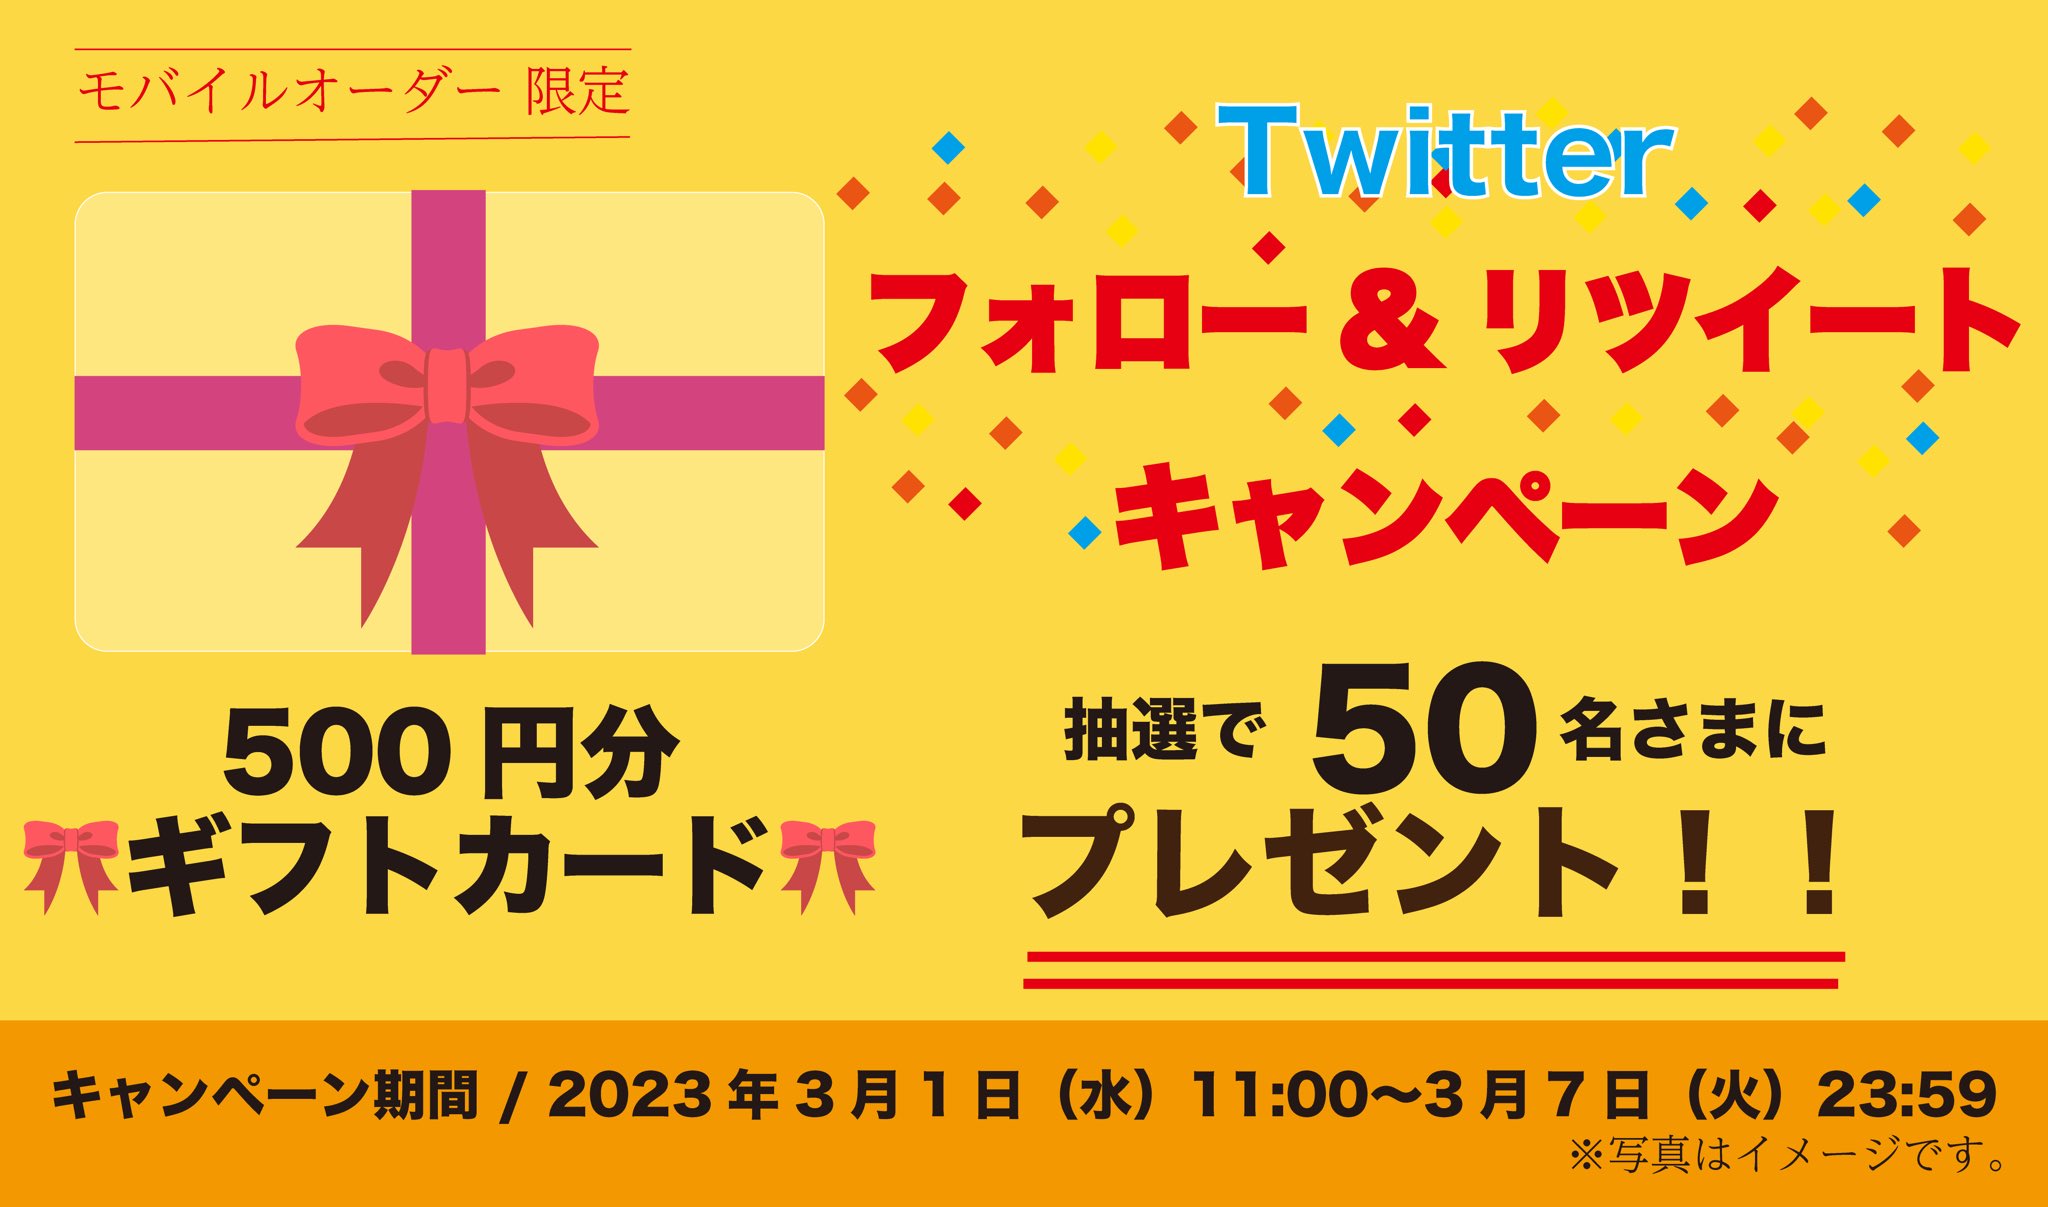 This gift card can be used for mobile orders only, and the change remains in the customer's cell phone until the end of the transaction. The four participating stores are 八幡山/Sasazuka/Yurakucho/Kanda. Please note that mobile ordering may be suspended without prior notice due to changes in stock availability and stock status. Please understand this in advance. Winning customers can use the gift card for any product at any store of their choice at any time.